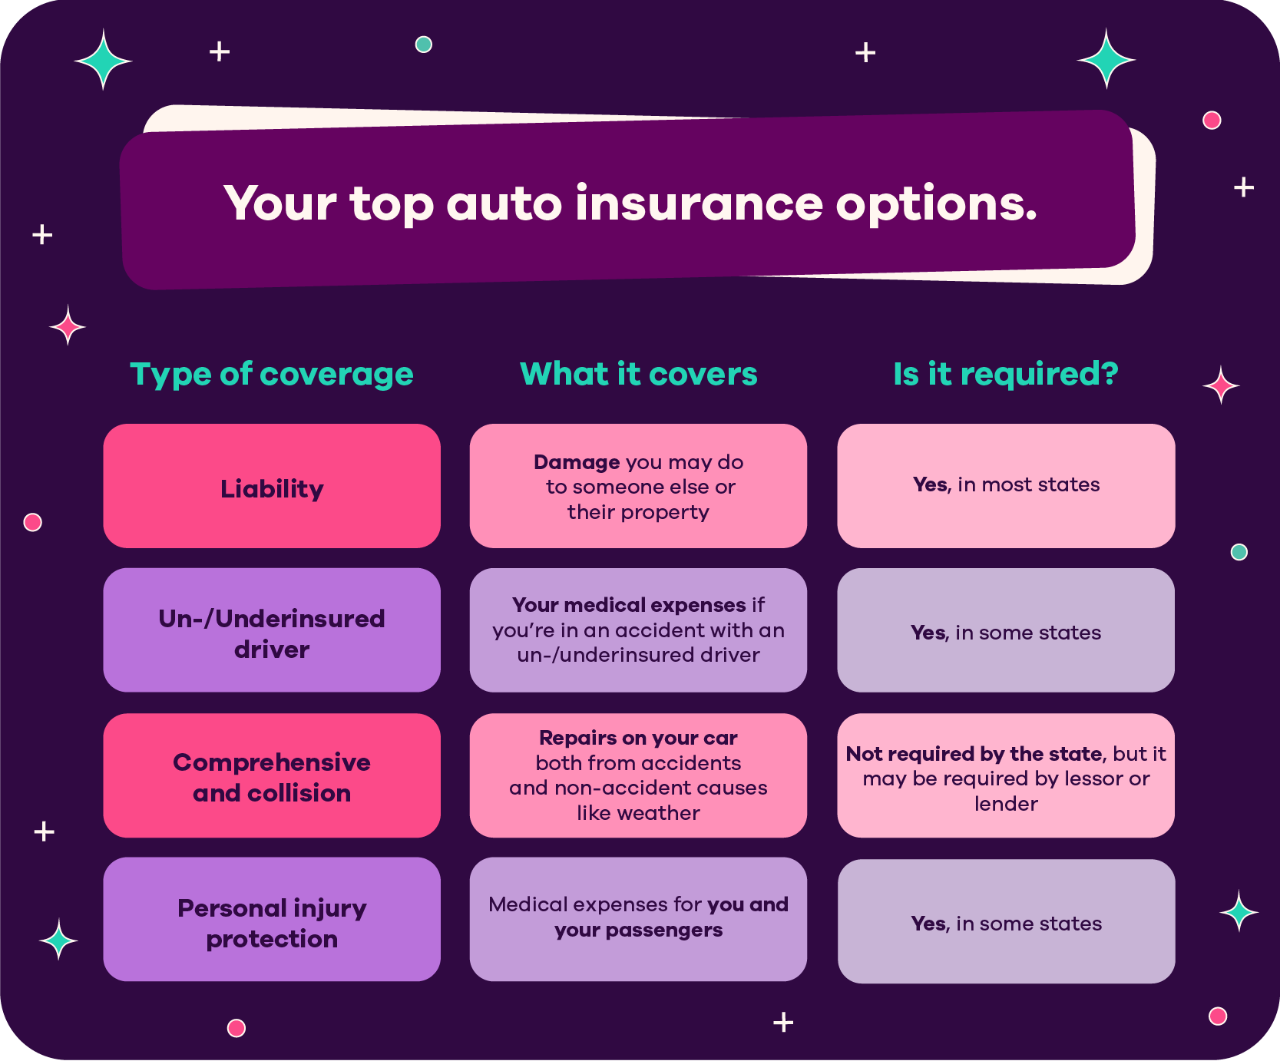 Your top auto insurance options. Liability coverage: it covers damage you may do to someone else or their property and is required in most states. Un or underinsured driver coverage: it covers your medical expenses if you're in an accident with an uninsured or underinsured driver and is required in some states. Comprehensive and collision coverage: it covers repairs on your car both from accidents and non-accident causes like weather and is not required by the state, but it may be required by a lessor or lender. Personal injury protection: it covers medical expenses for you and your passengers and is required in some states.